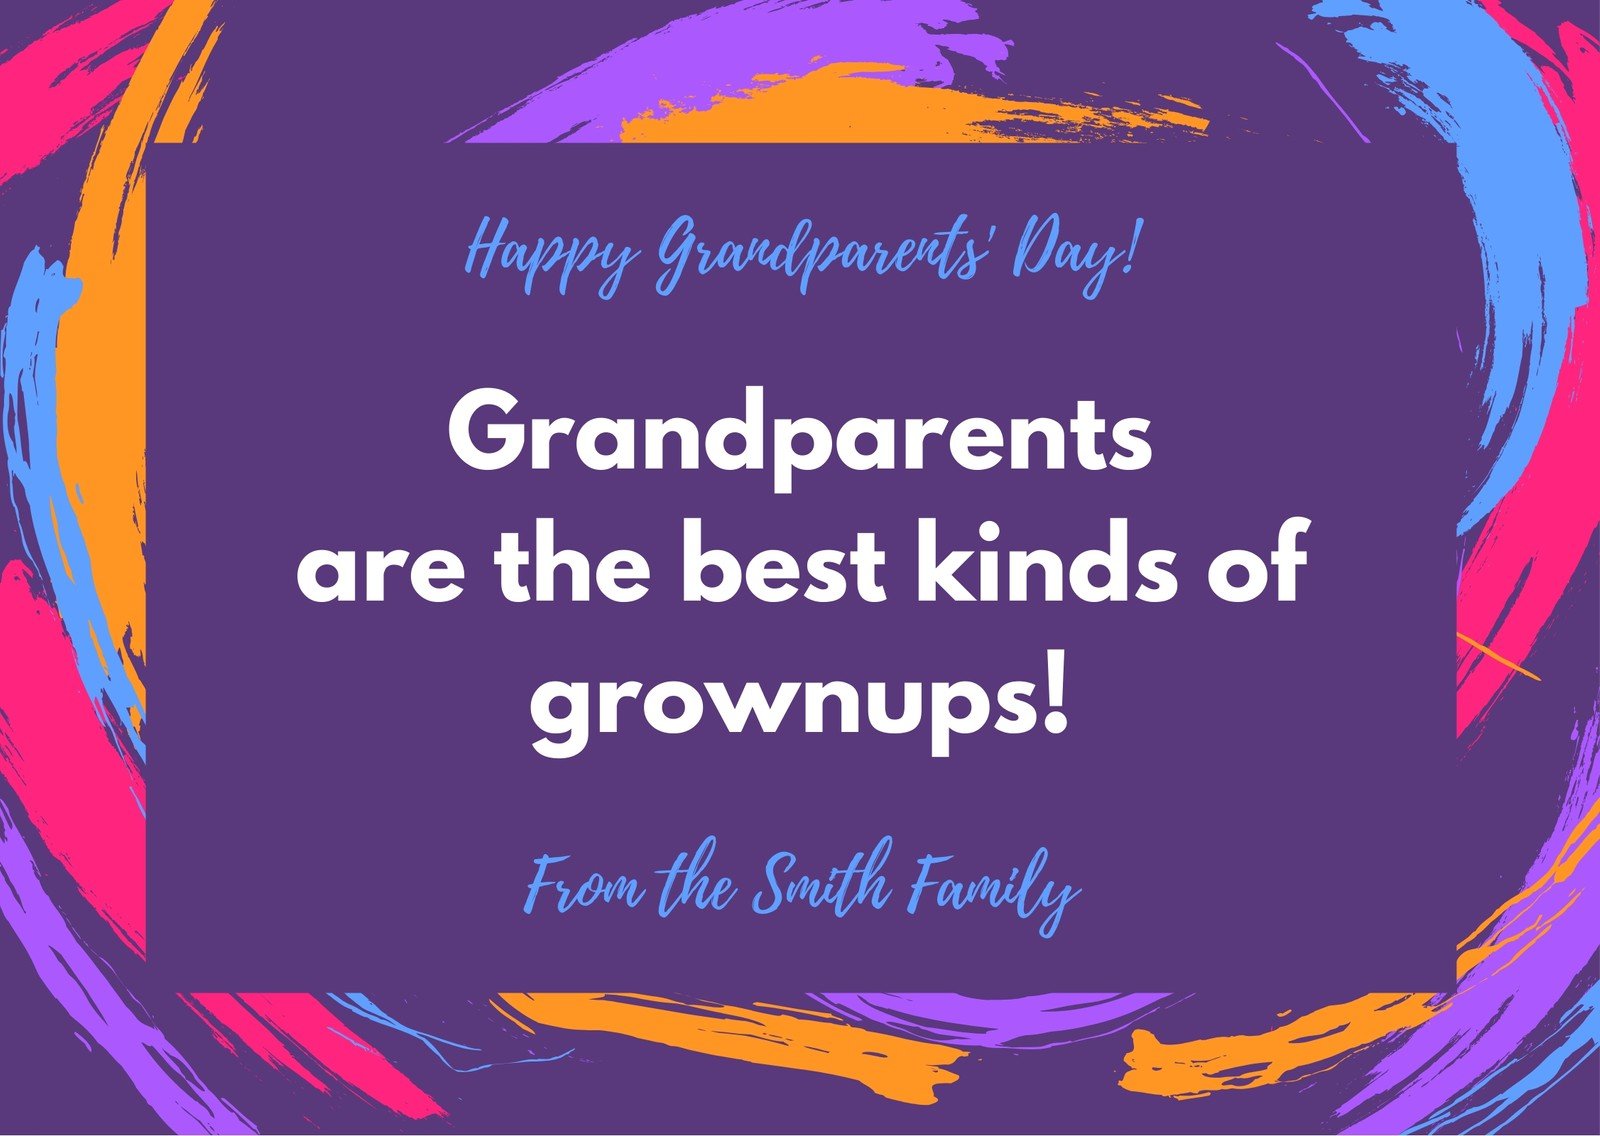 25-images-of-grandparents-day-card-template-bfegy-grandparents-day